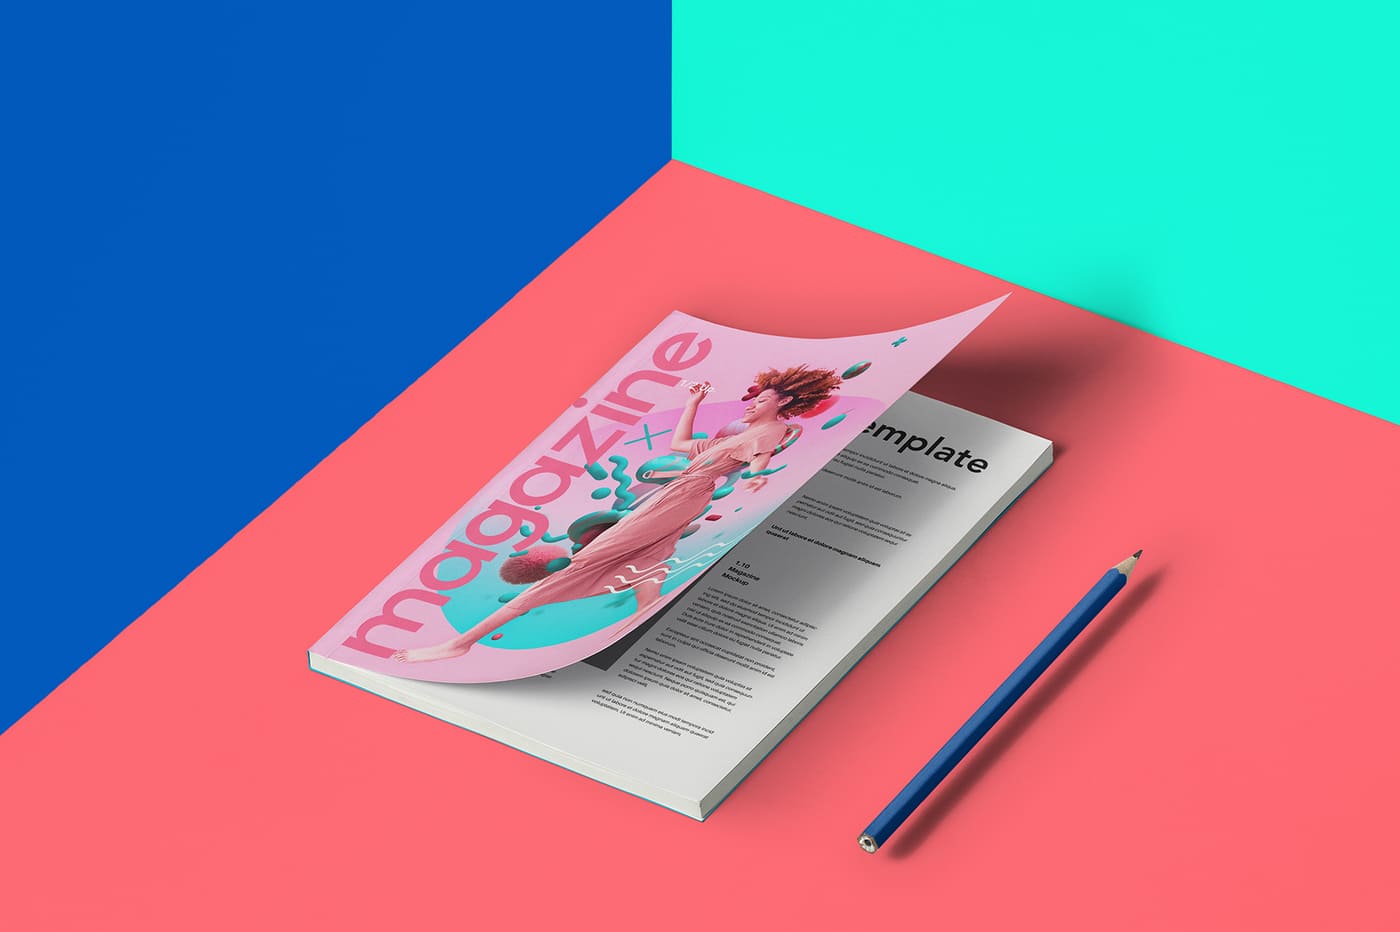 Using 3D Suprematism on a magazine